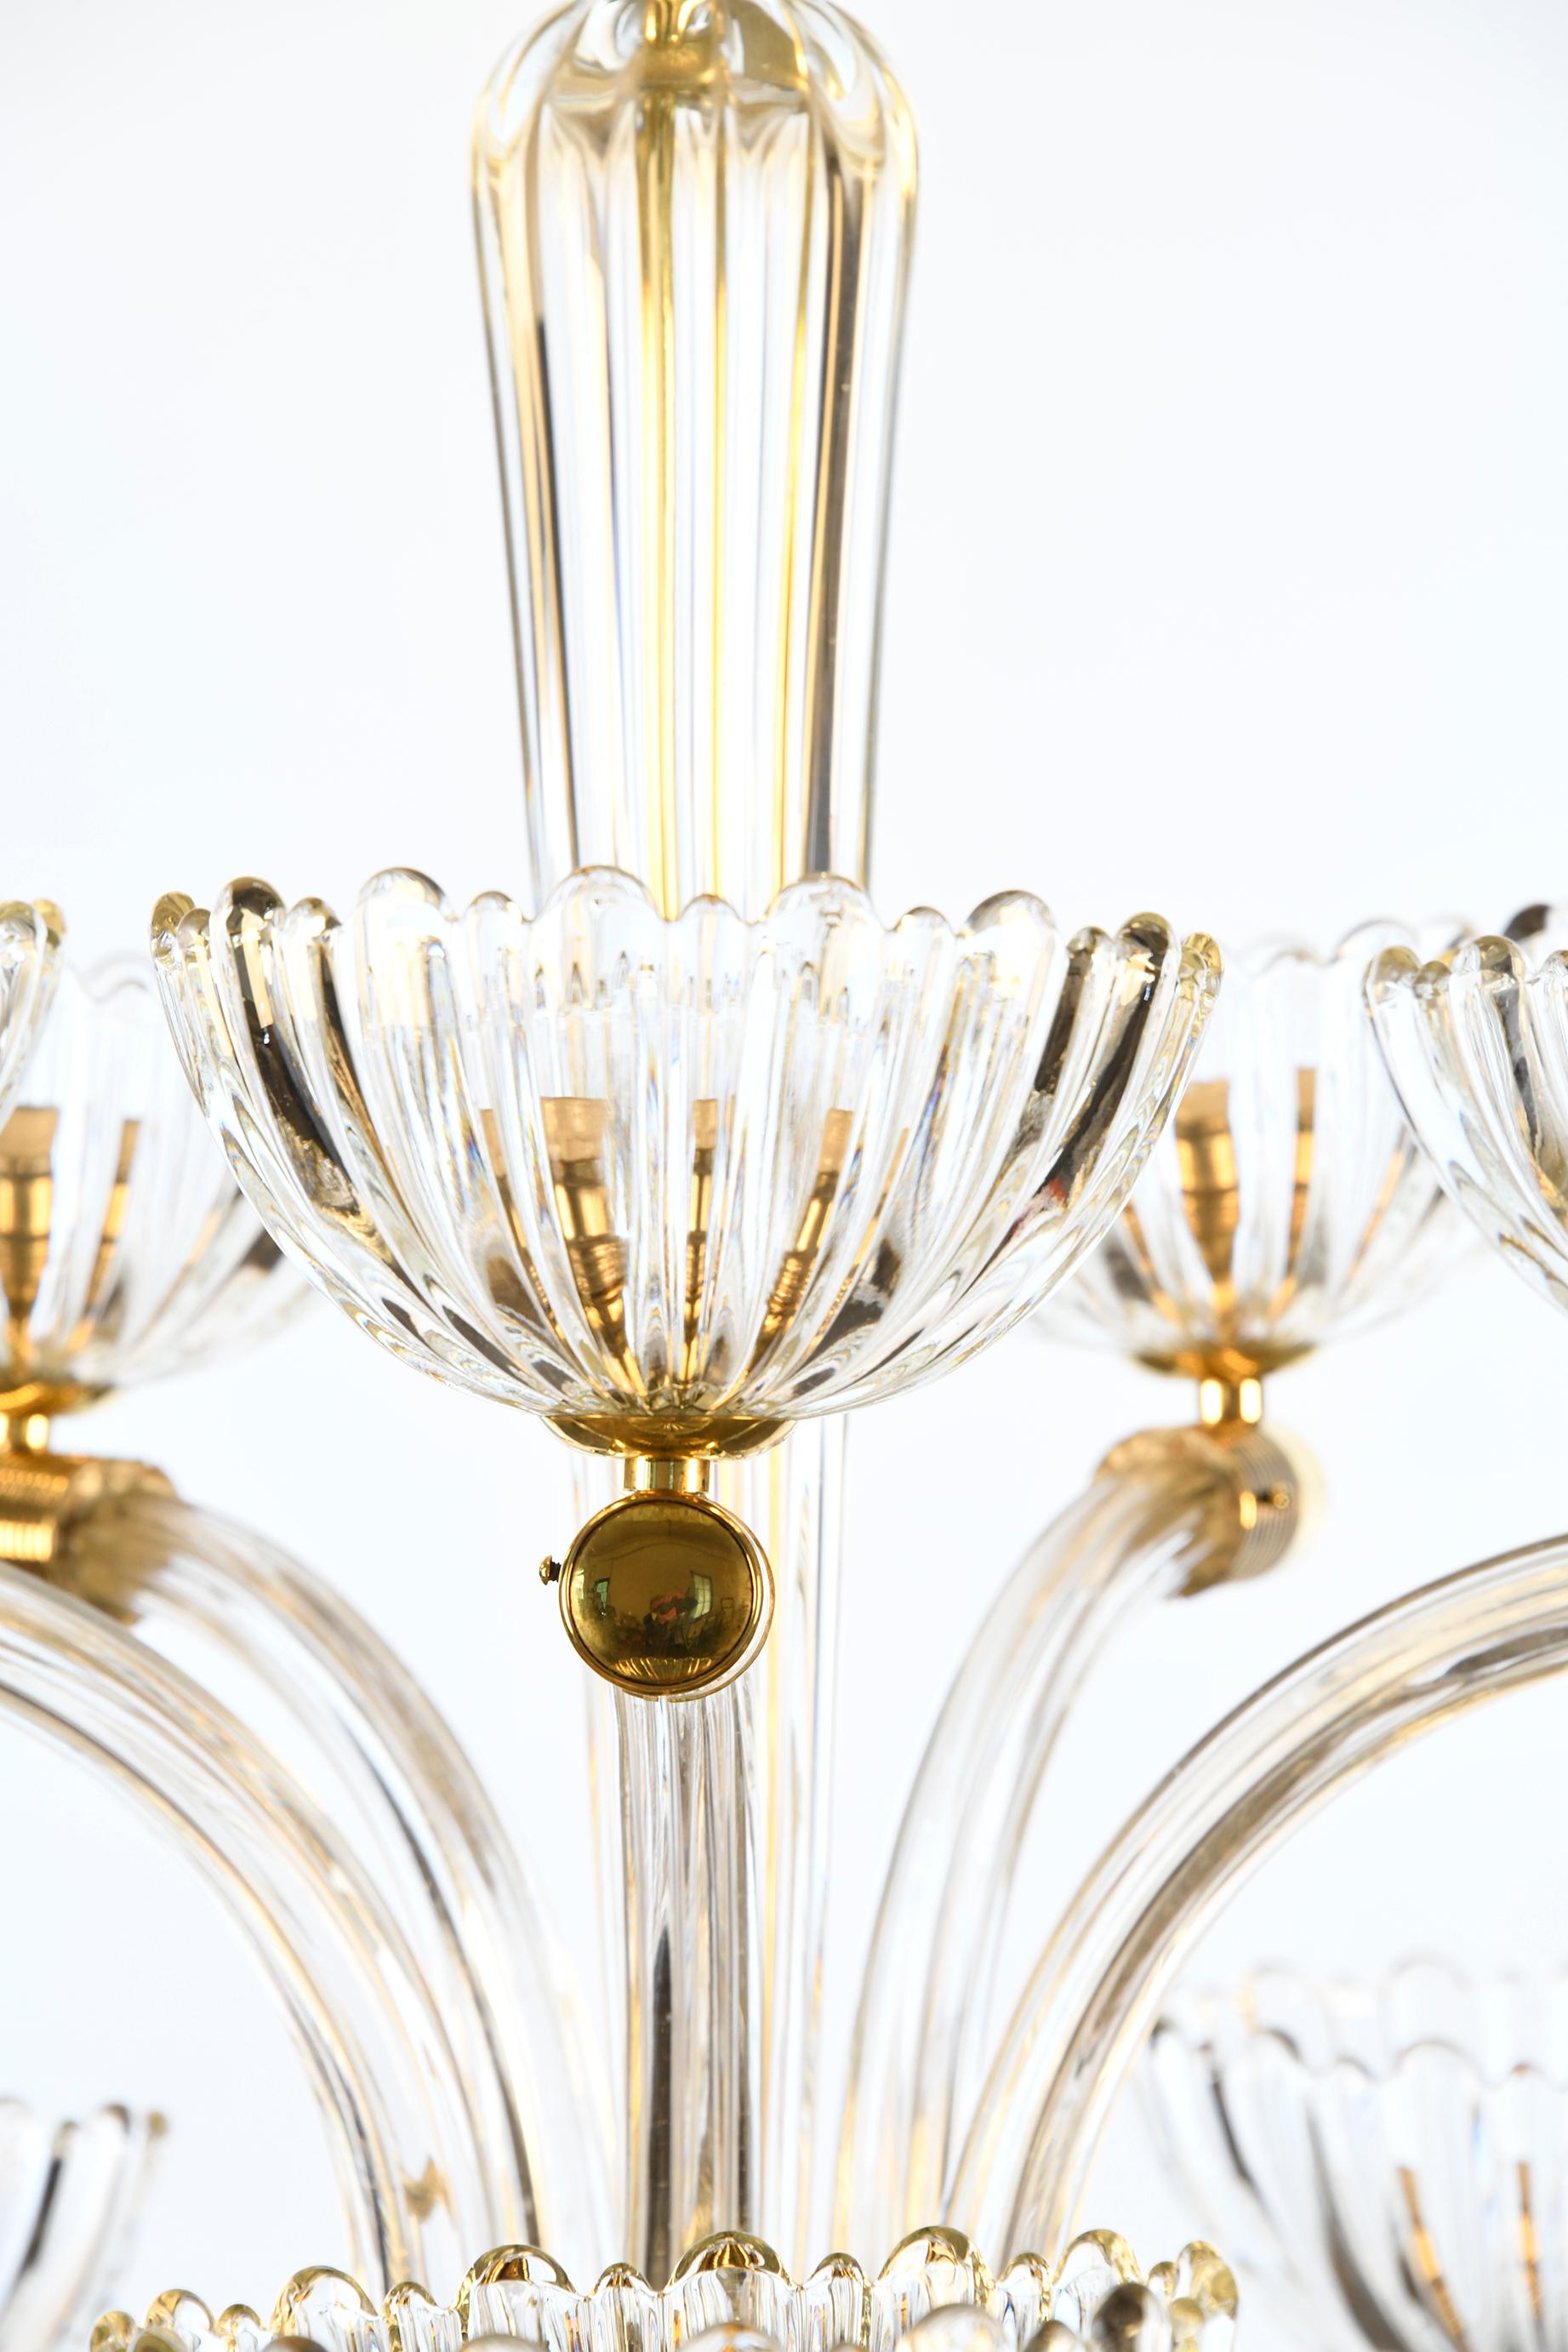 Italian Mid-20th Century Chandelier by Ercole Barovier, 10 Lights, Murano, 1940 For Sale